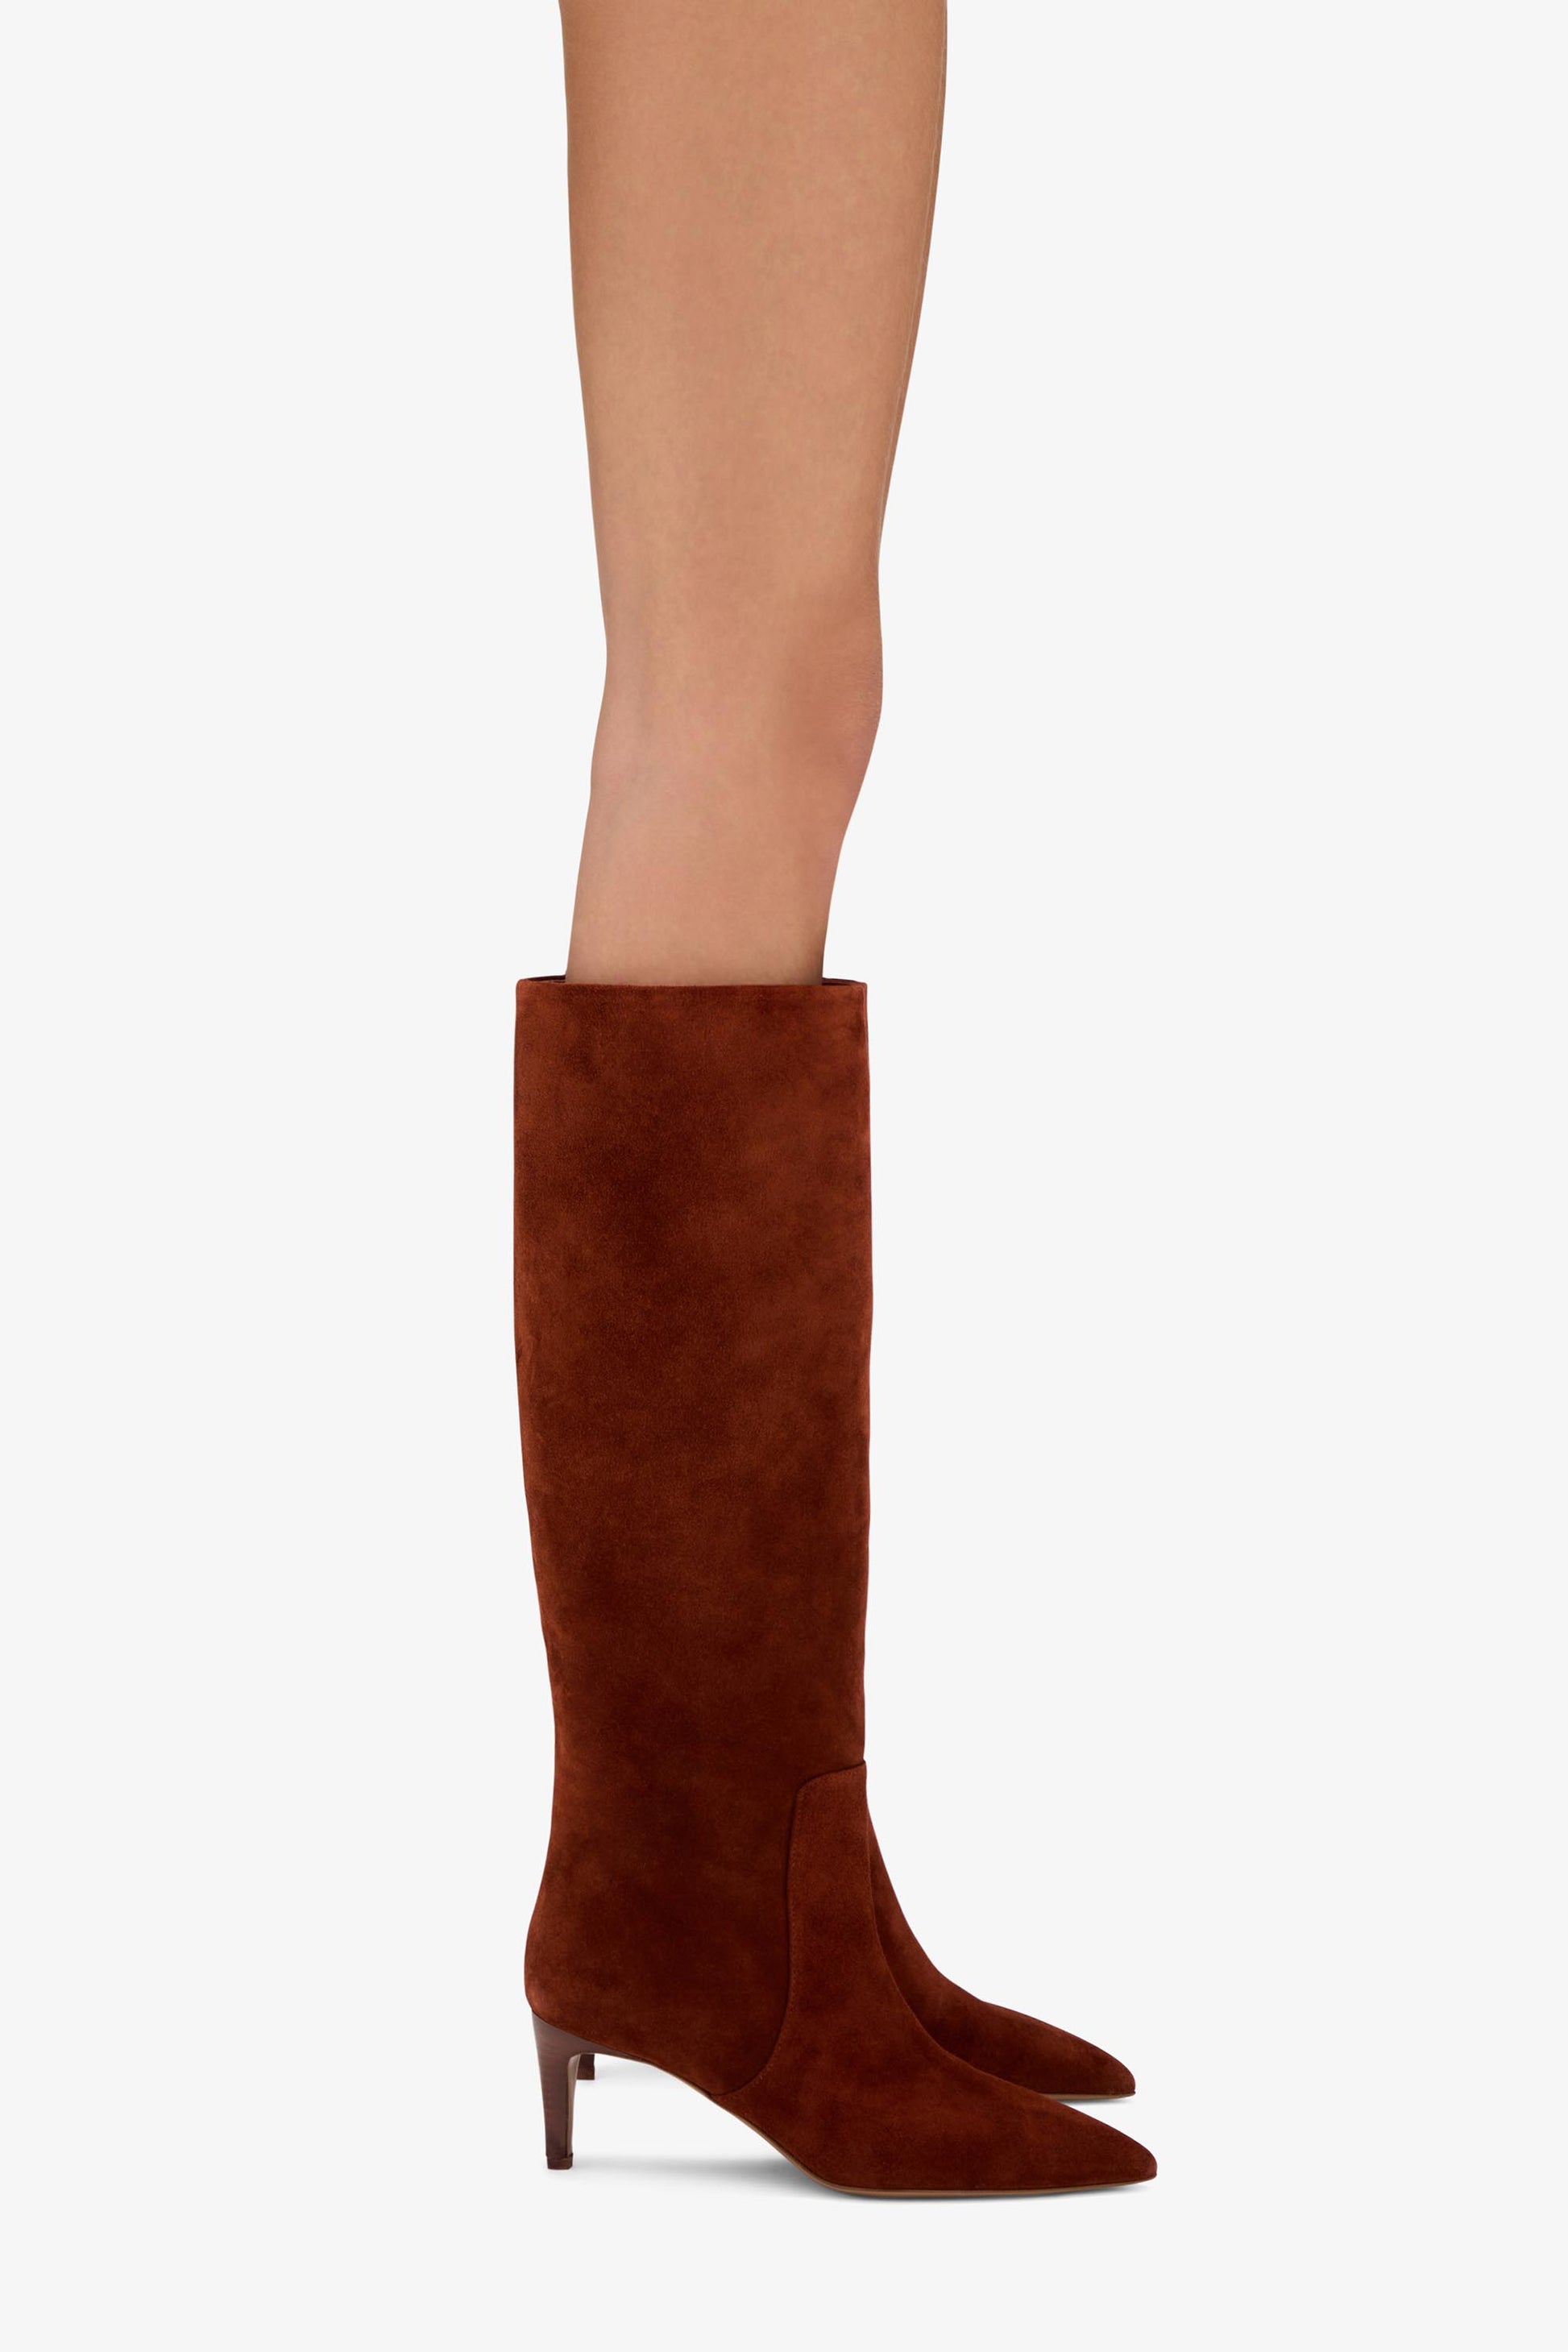 Rust suede knee-high boot - Product worn